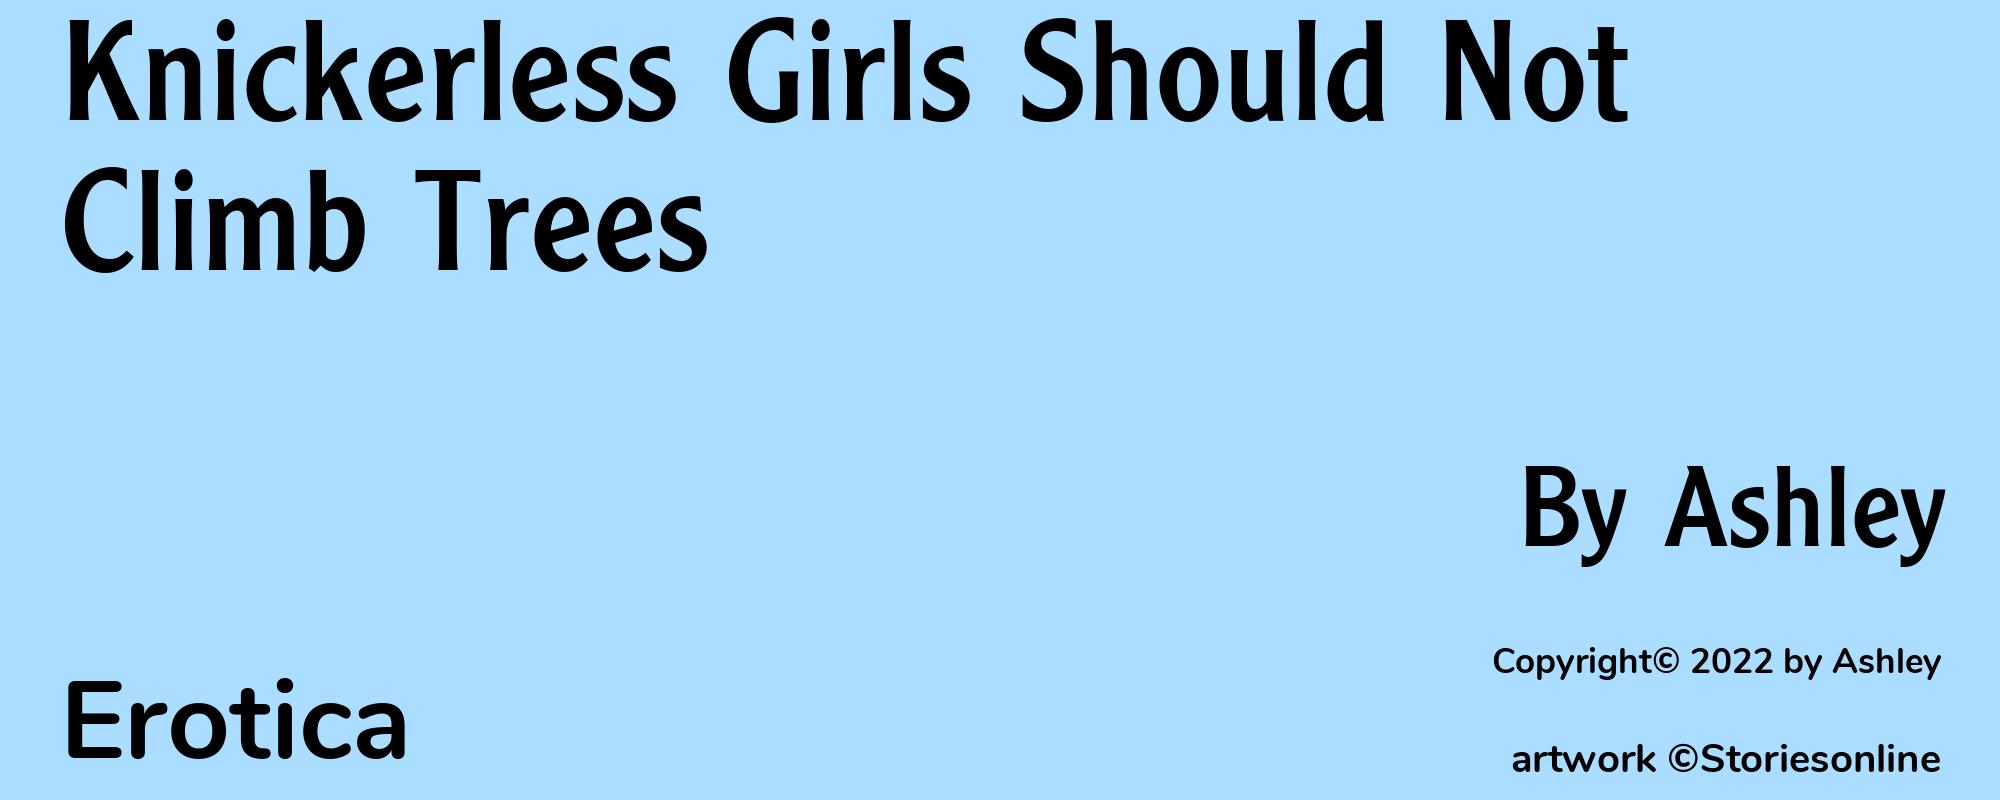 Knickerless Girls Should Not Climb Trees - Cover